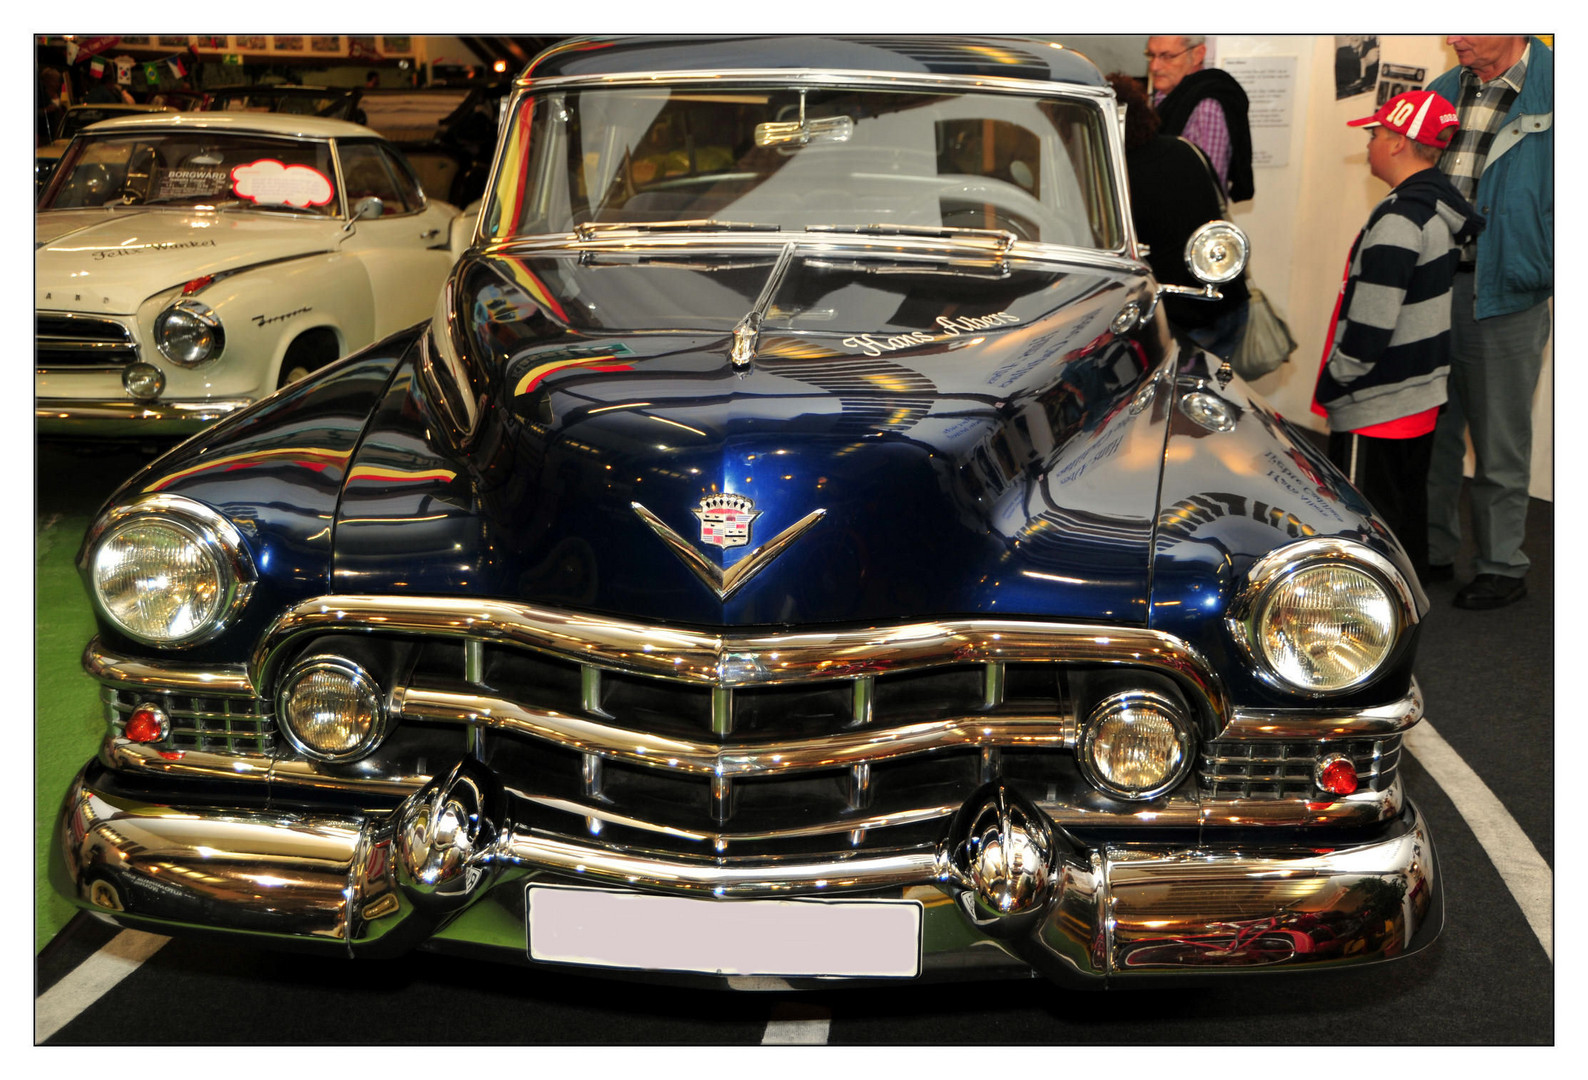 The Cadillac from Hans Albers in Bavaria